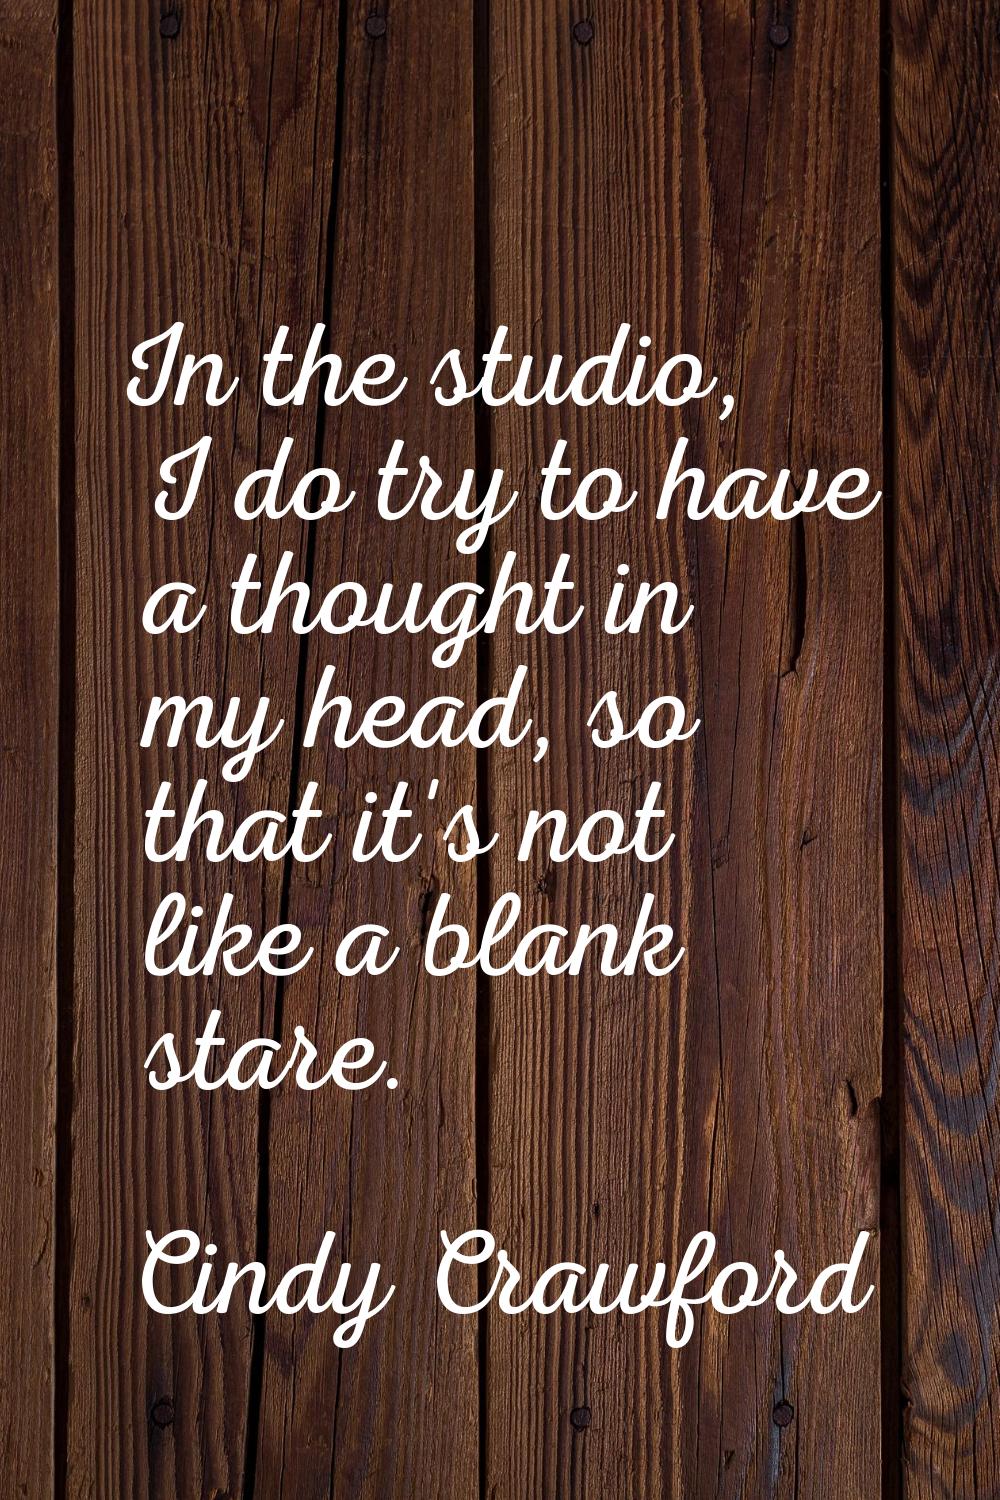 In the studio, I do try to have a thought in my head, so that it's not like a blank stare.